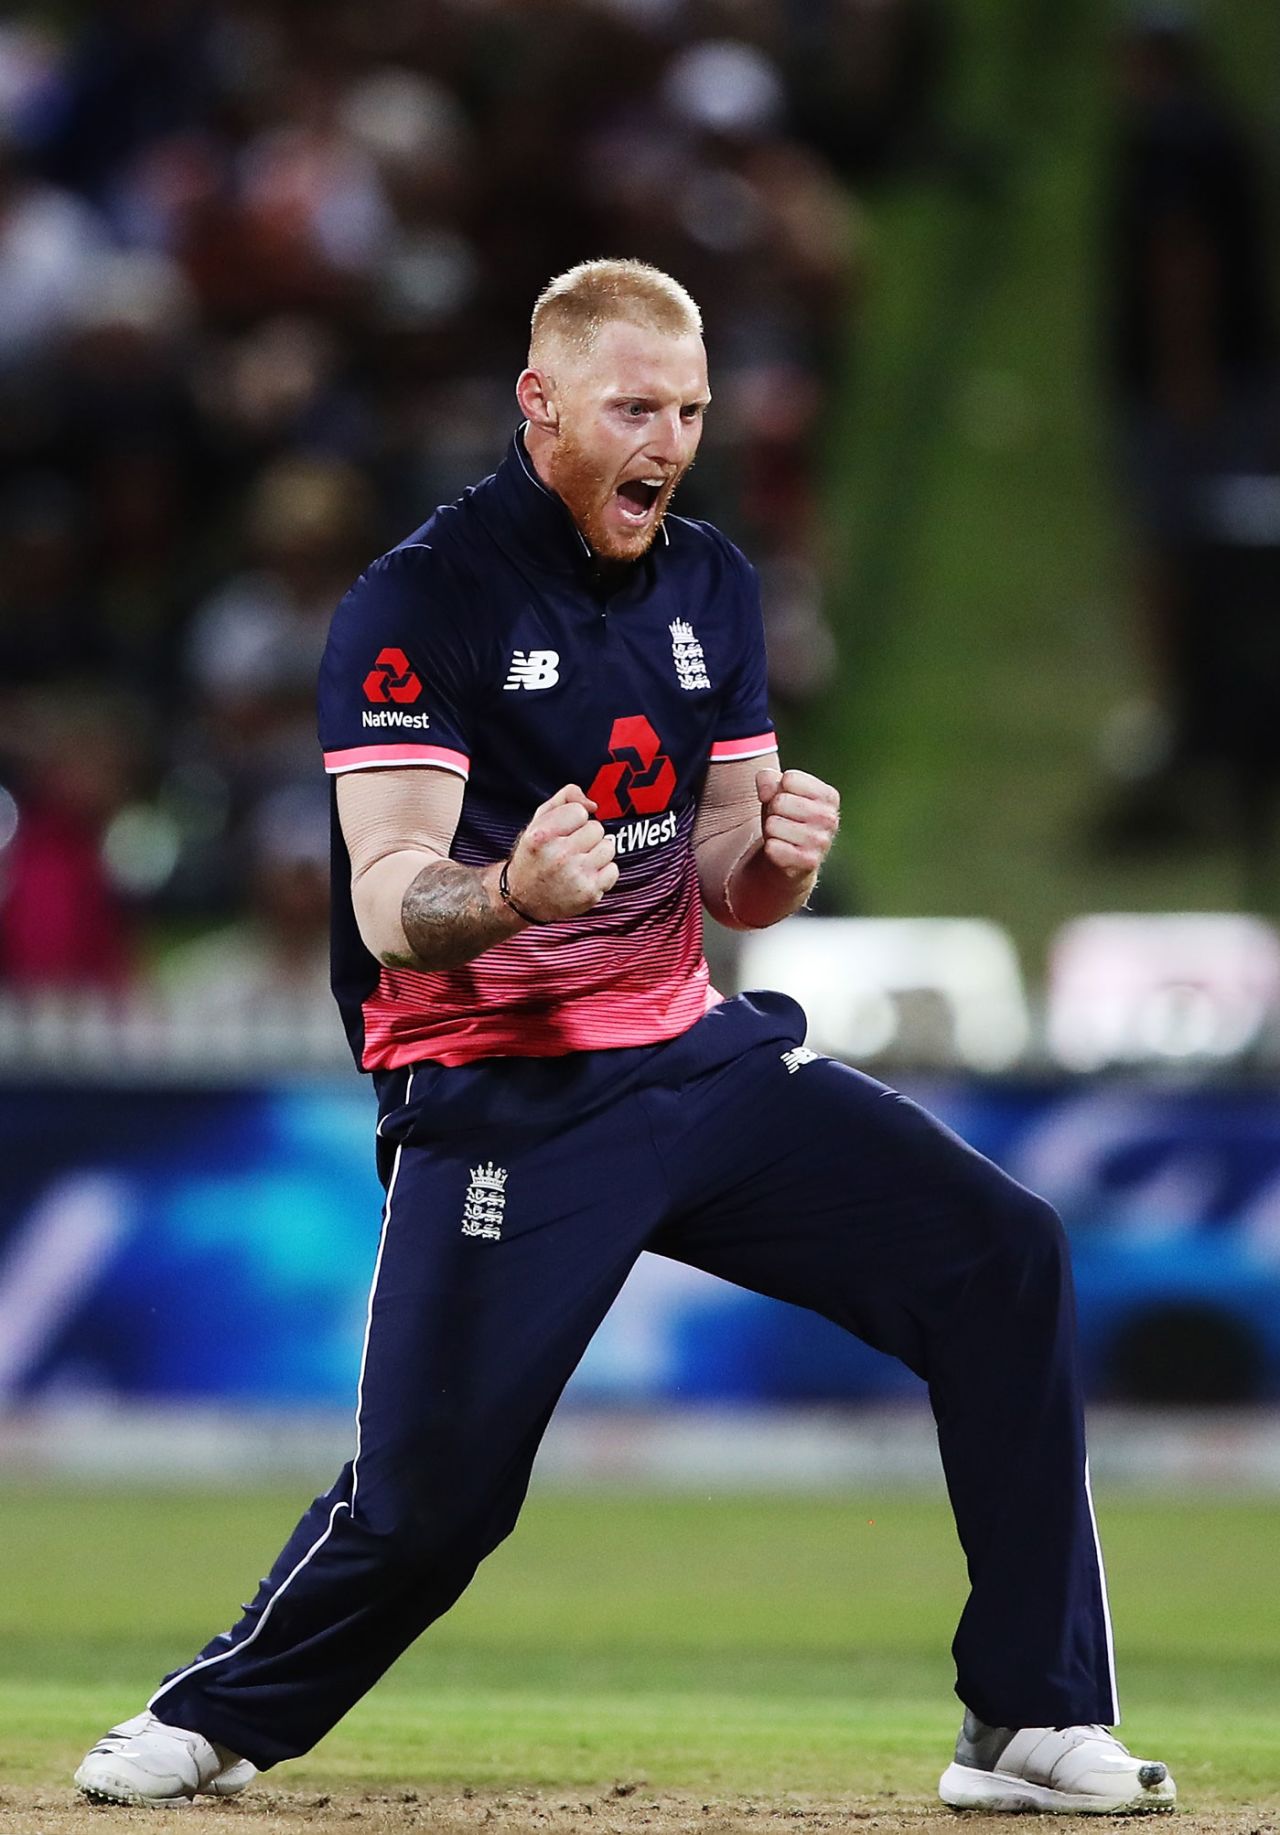 Ben Stokes broke the fourth-wicket stand between Ross Taylor and Tom Latham, New Zealand v England, 1st ODI, Hamilton, February 25, 2018